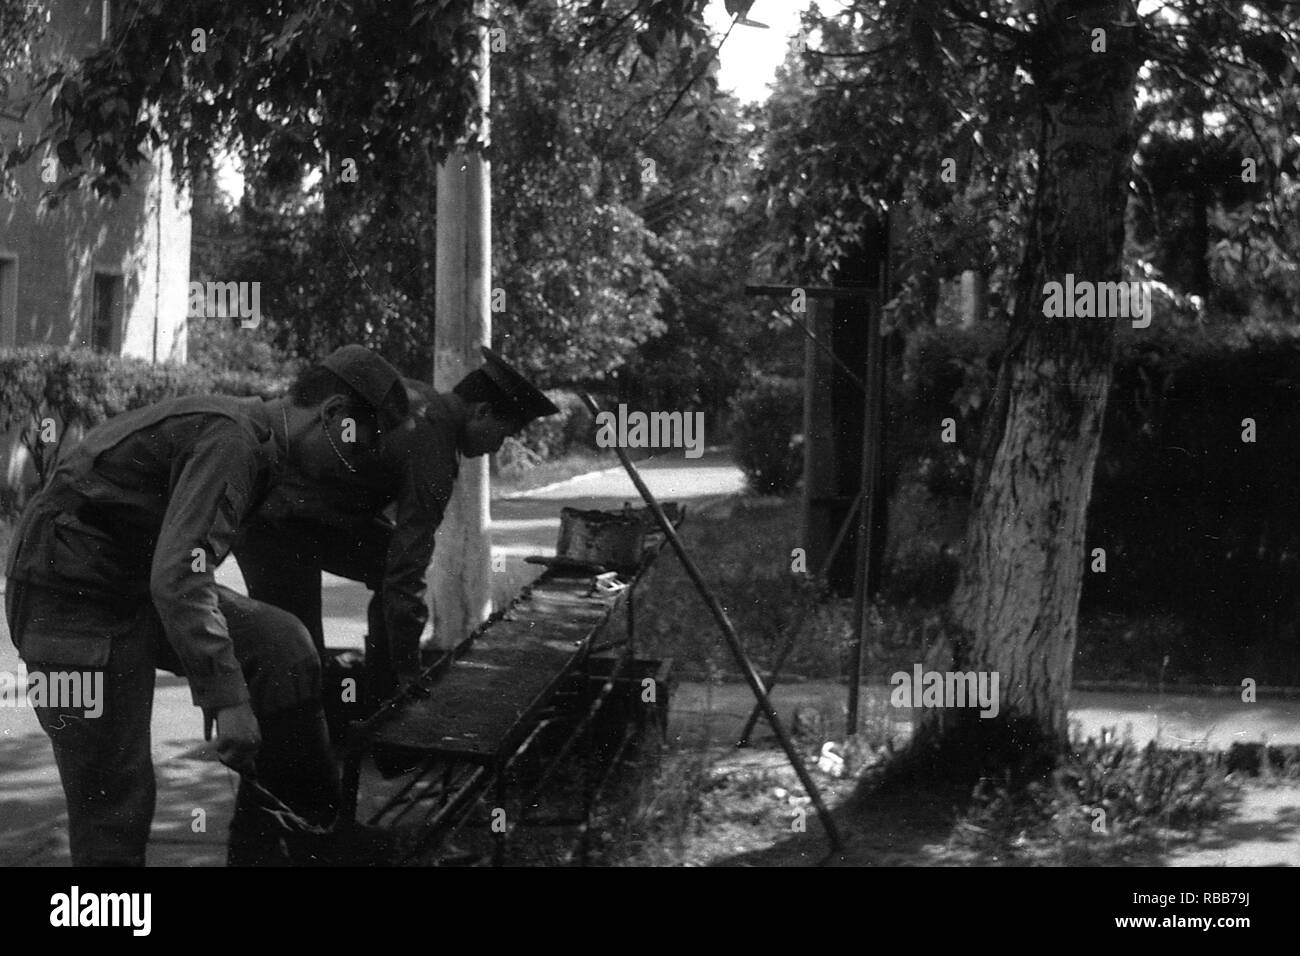 MOSCOW REGION, RUSSIA - CIRCA 1992: Soldiers of the Russian army are cleaning boots with shoe cream. Film scan. Large grain. Stock Photo